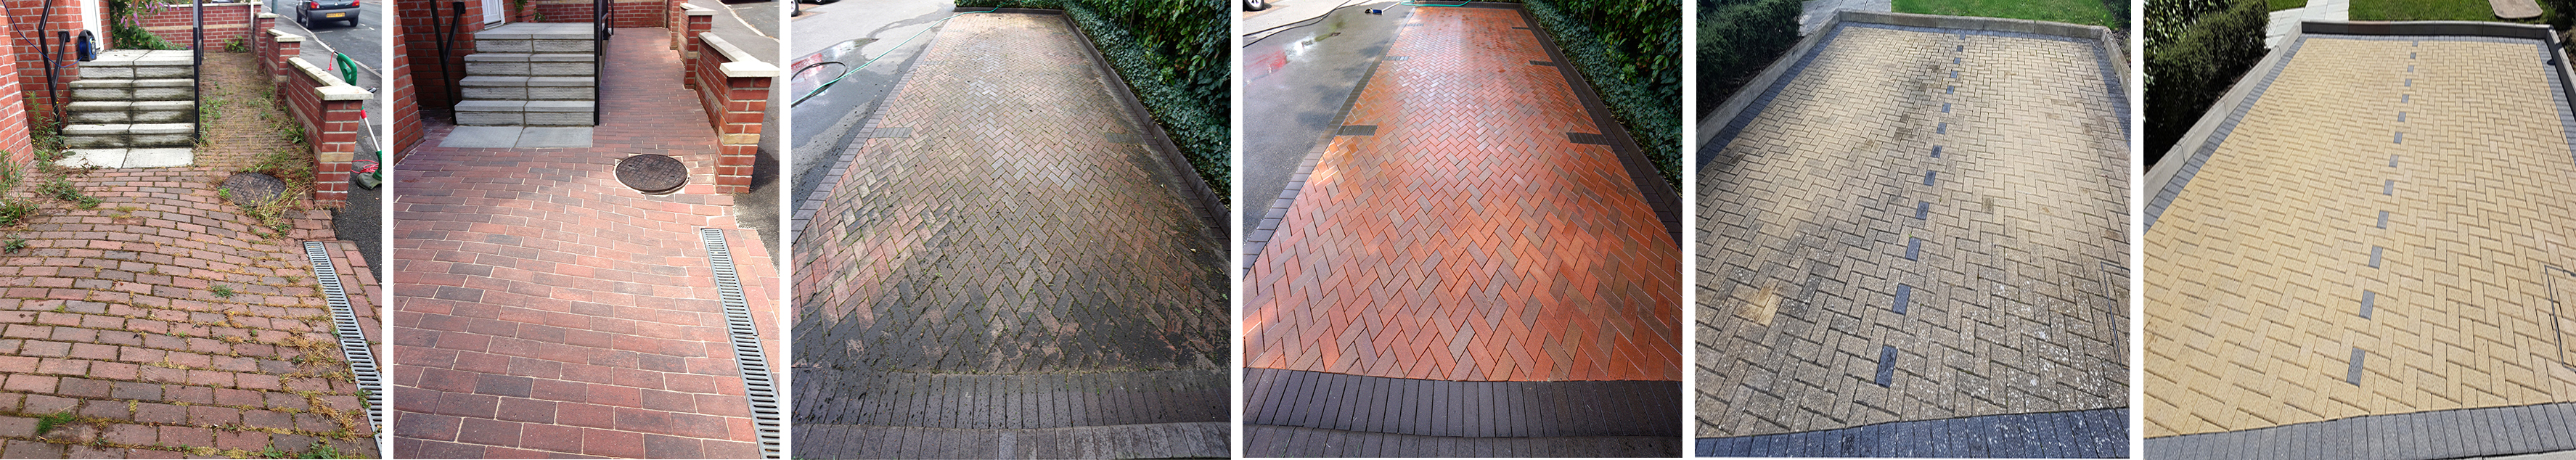 Driveway Cleaning Services in Broadstone, Dorset